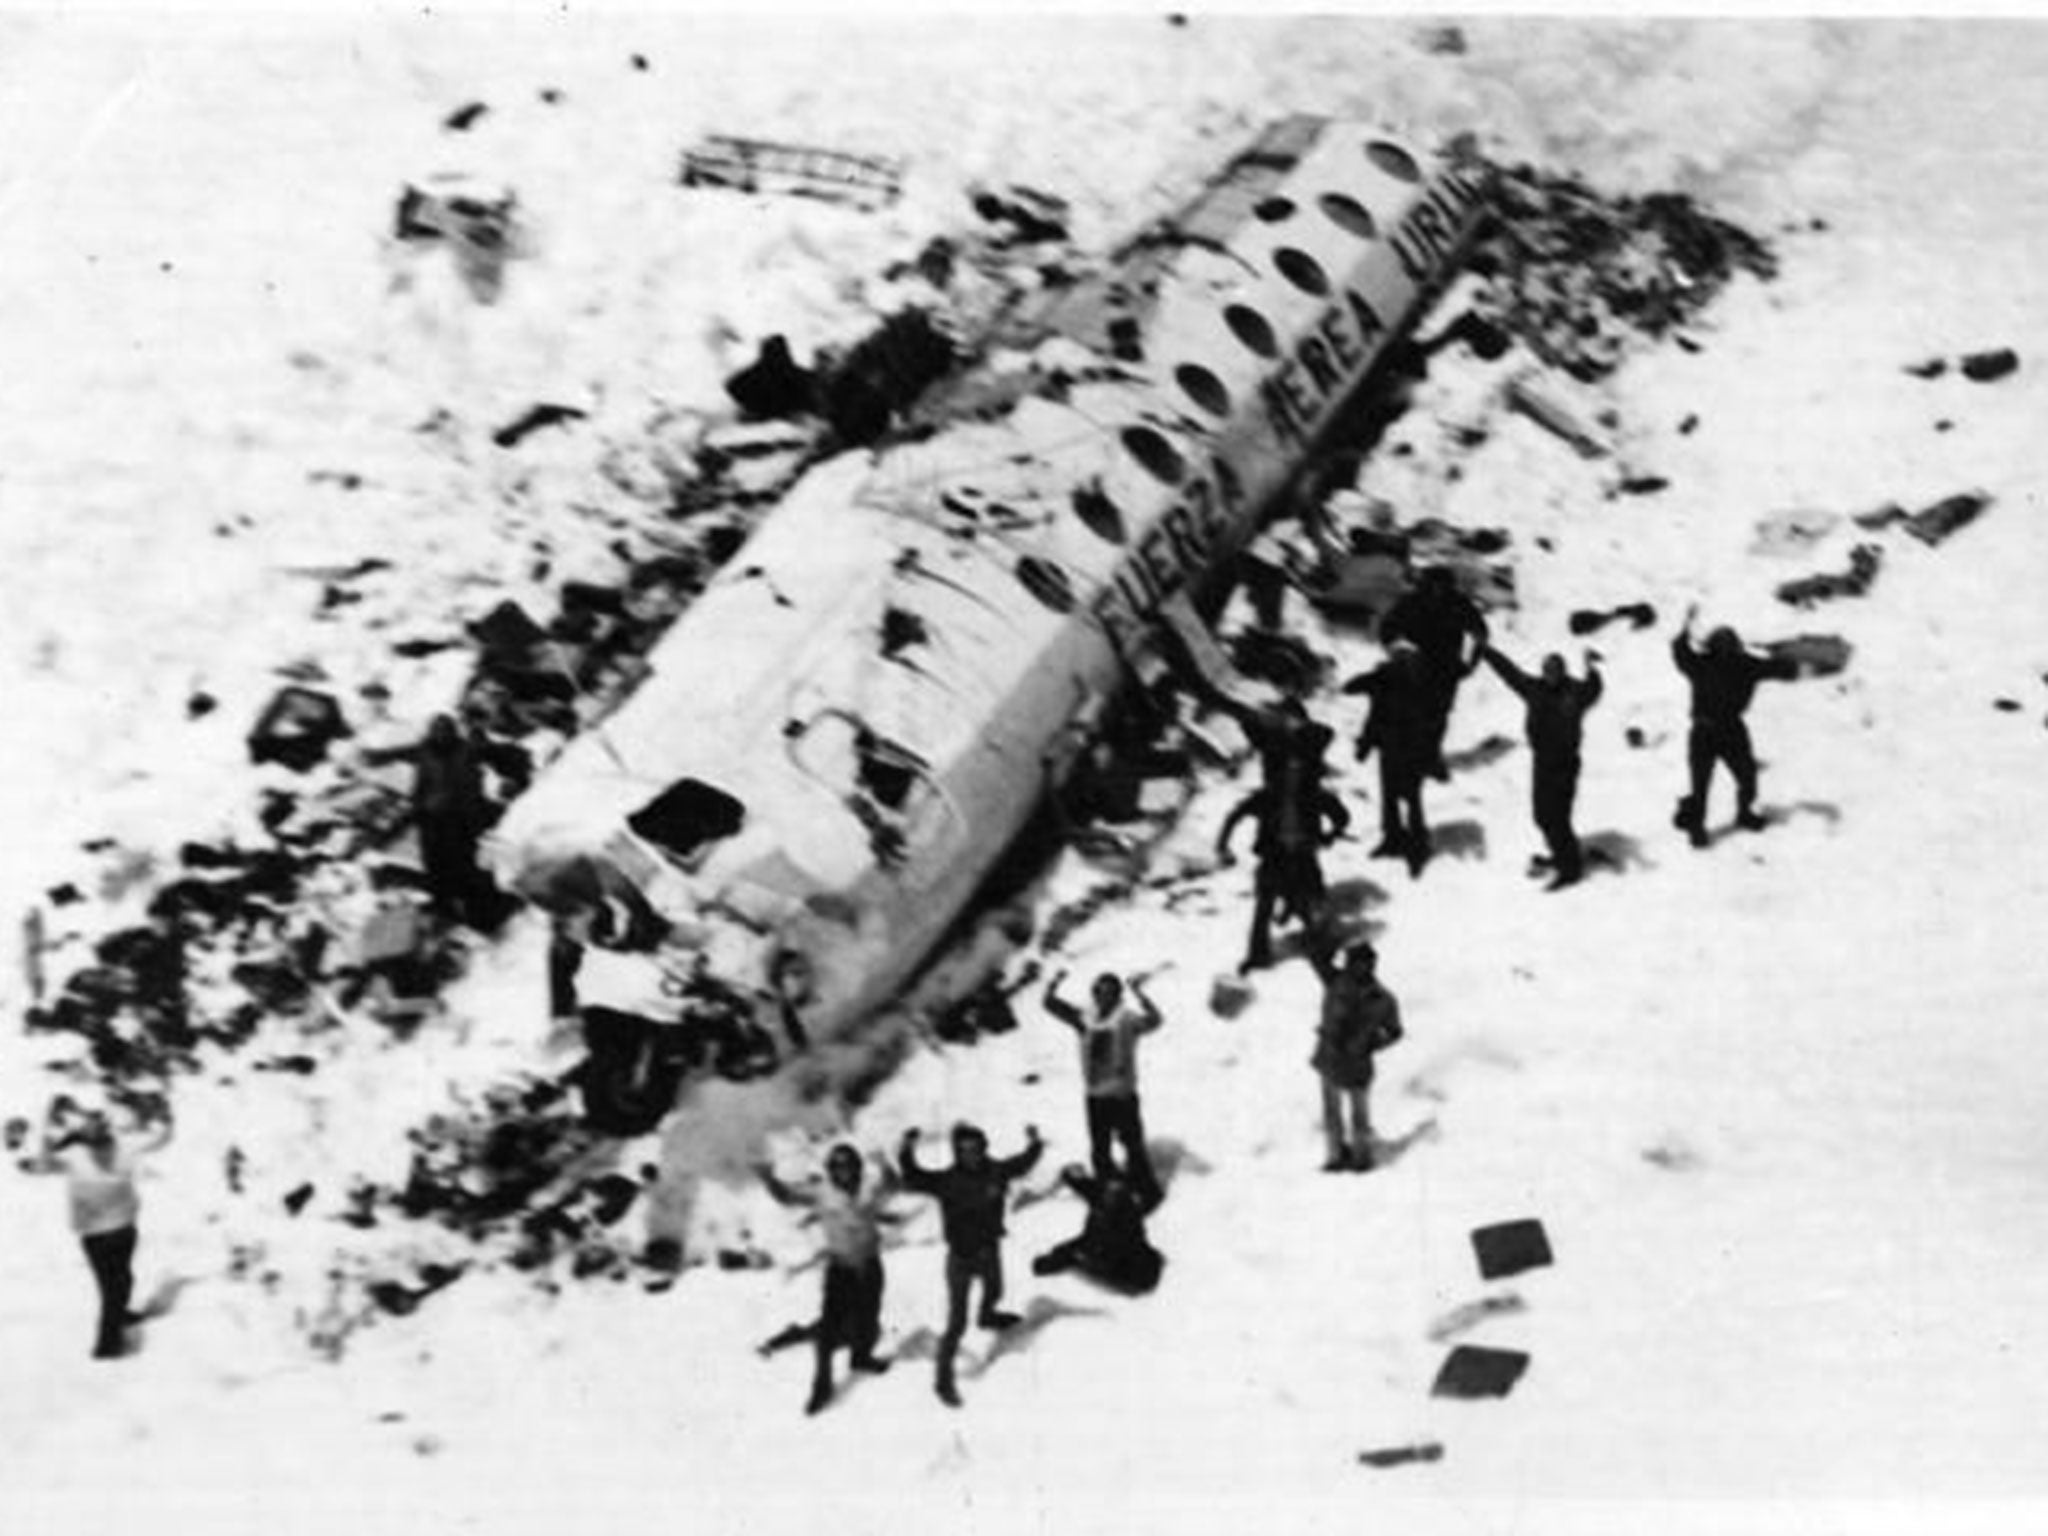 Survivor Of 1972 Plane Crash Recalls His Fight To Live By Resorting To  Cannibalism